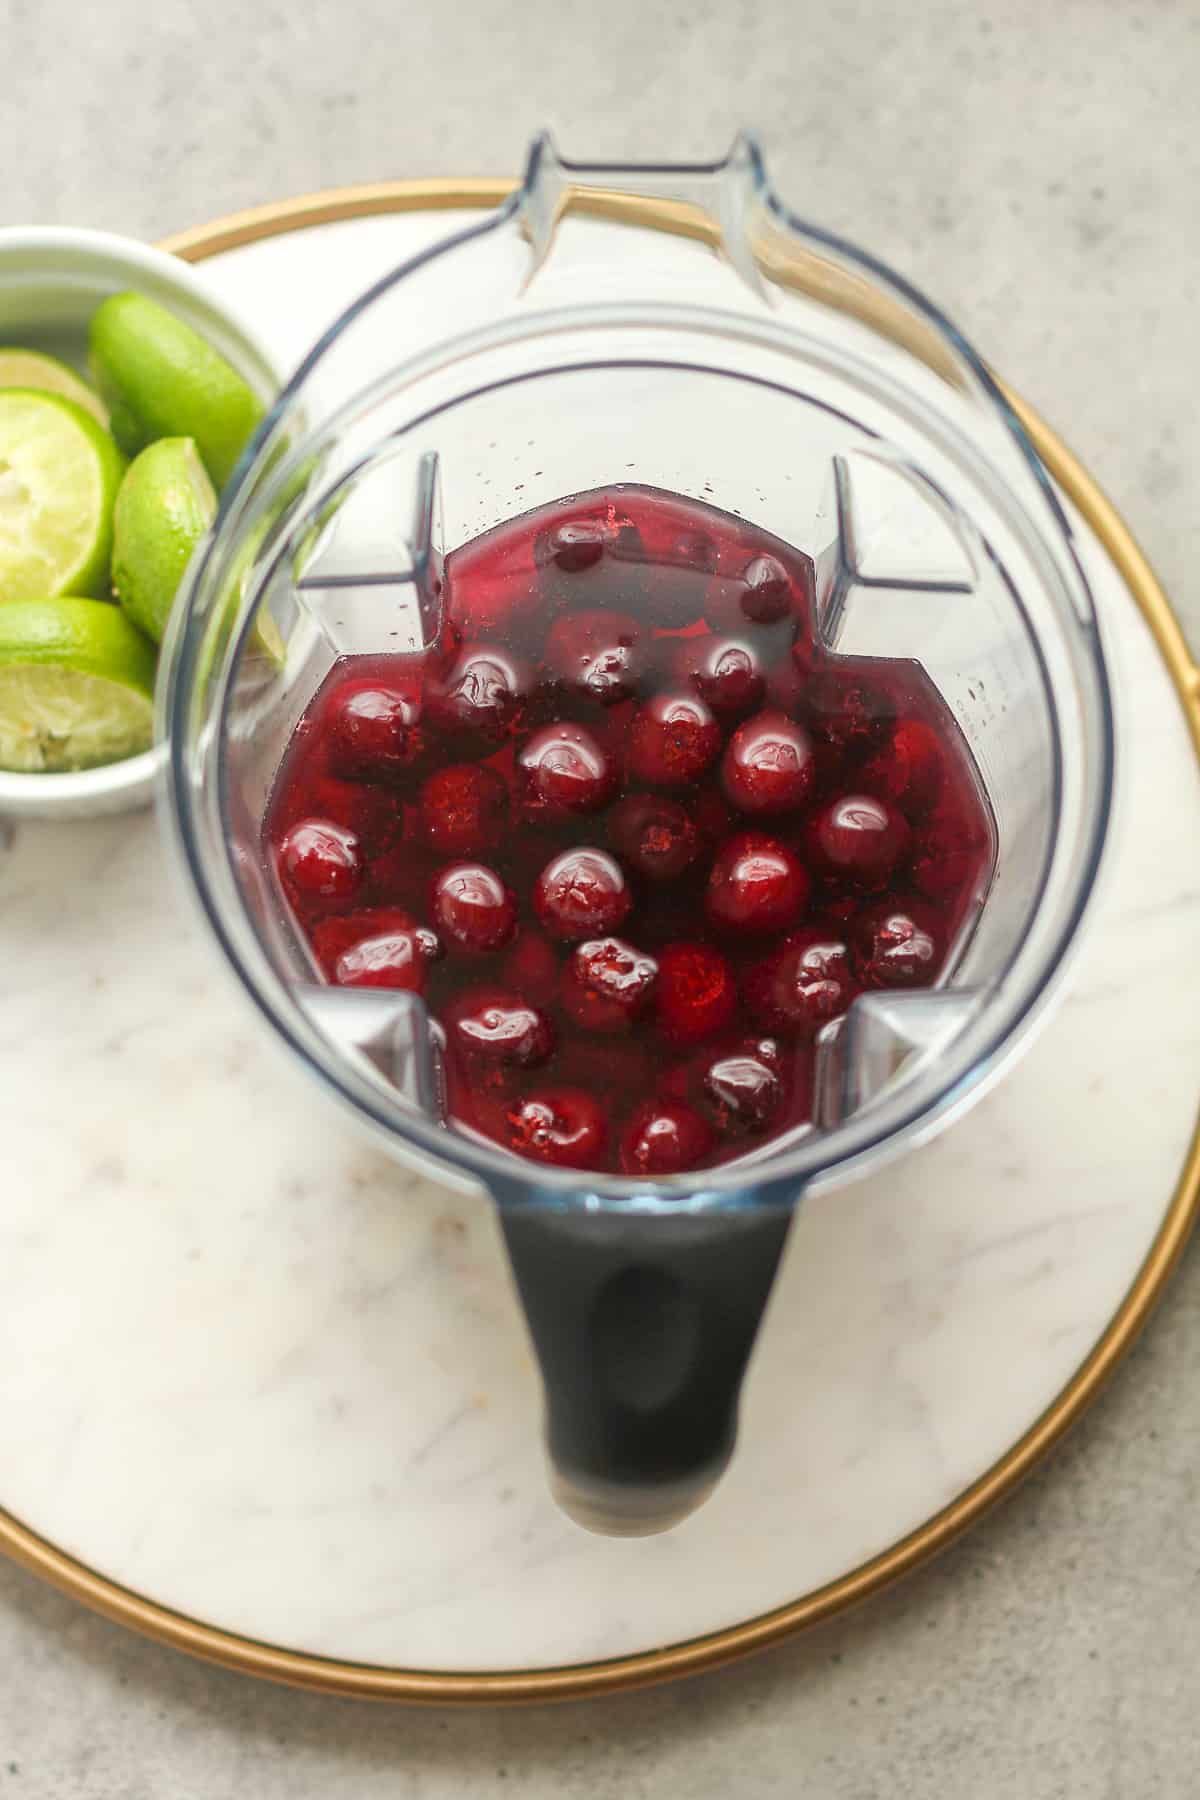 The blender with cherries and liquid.